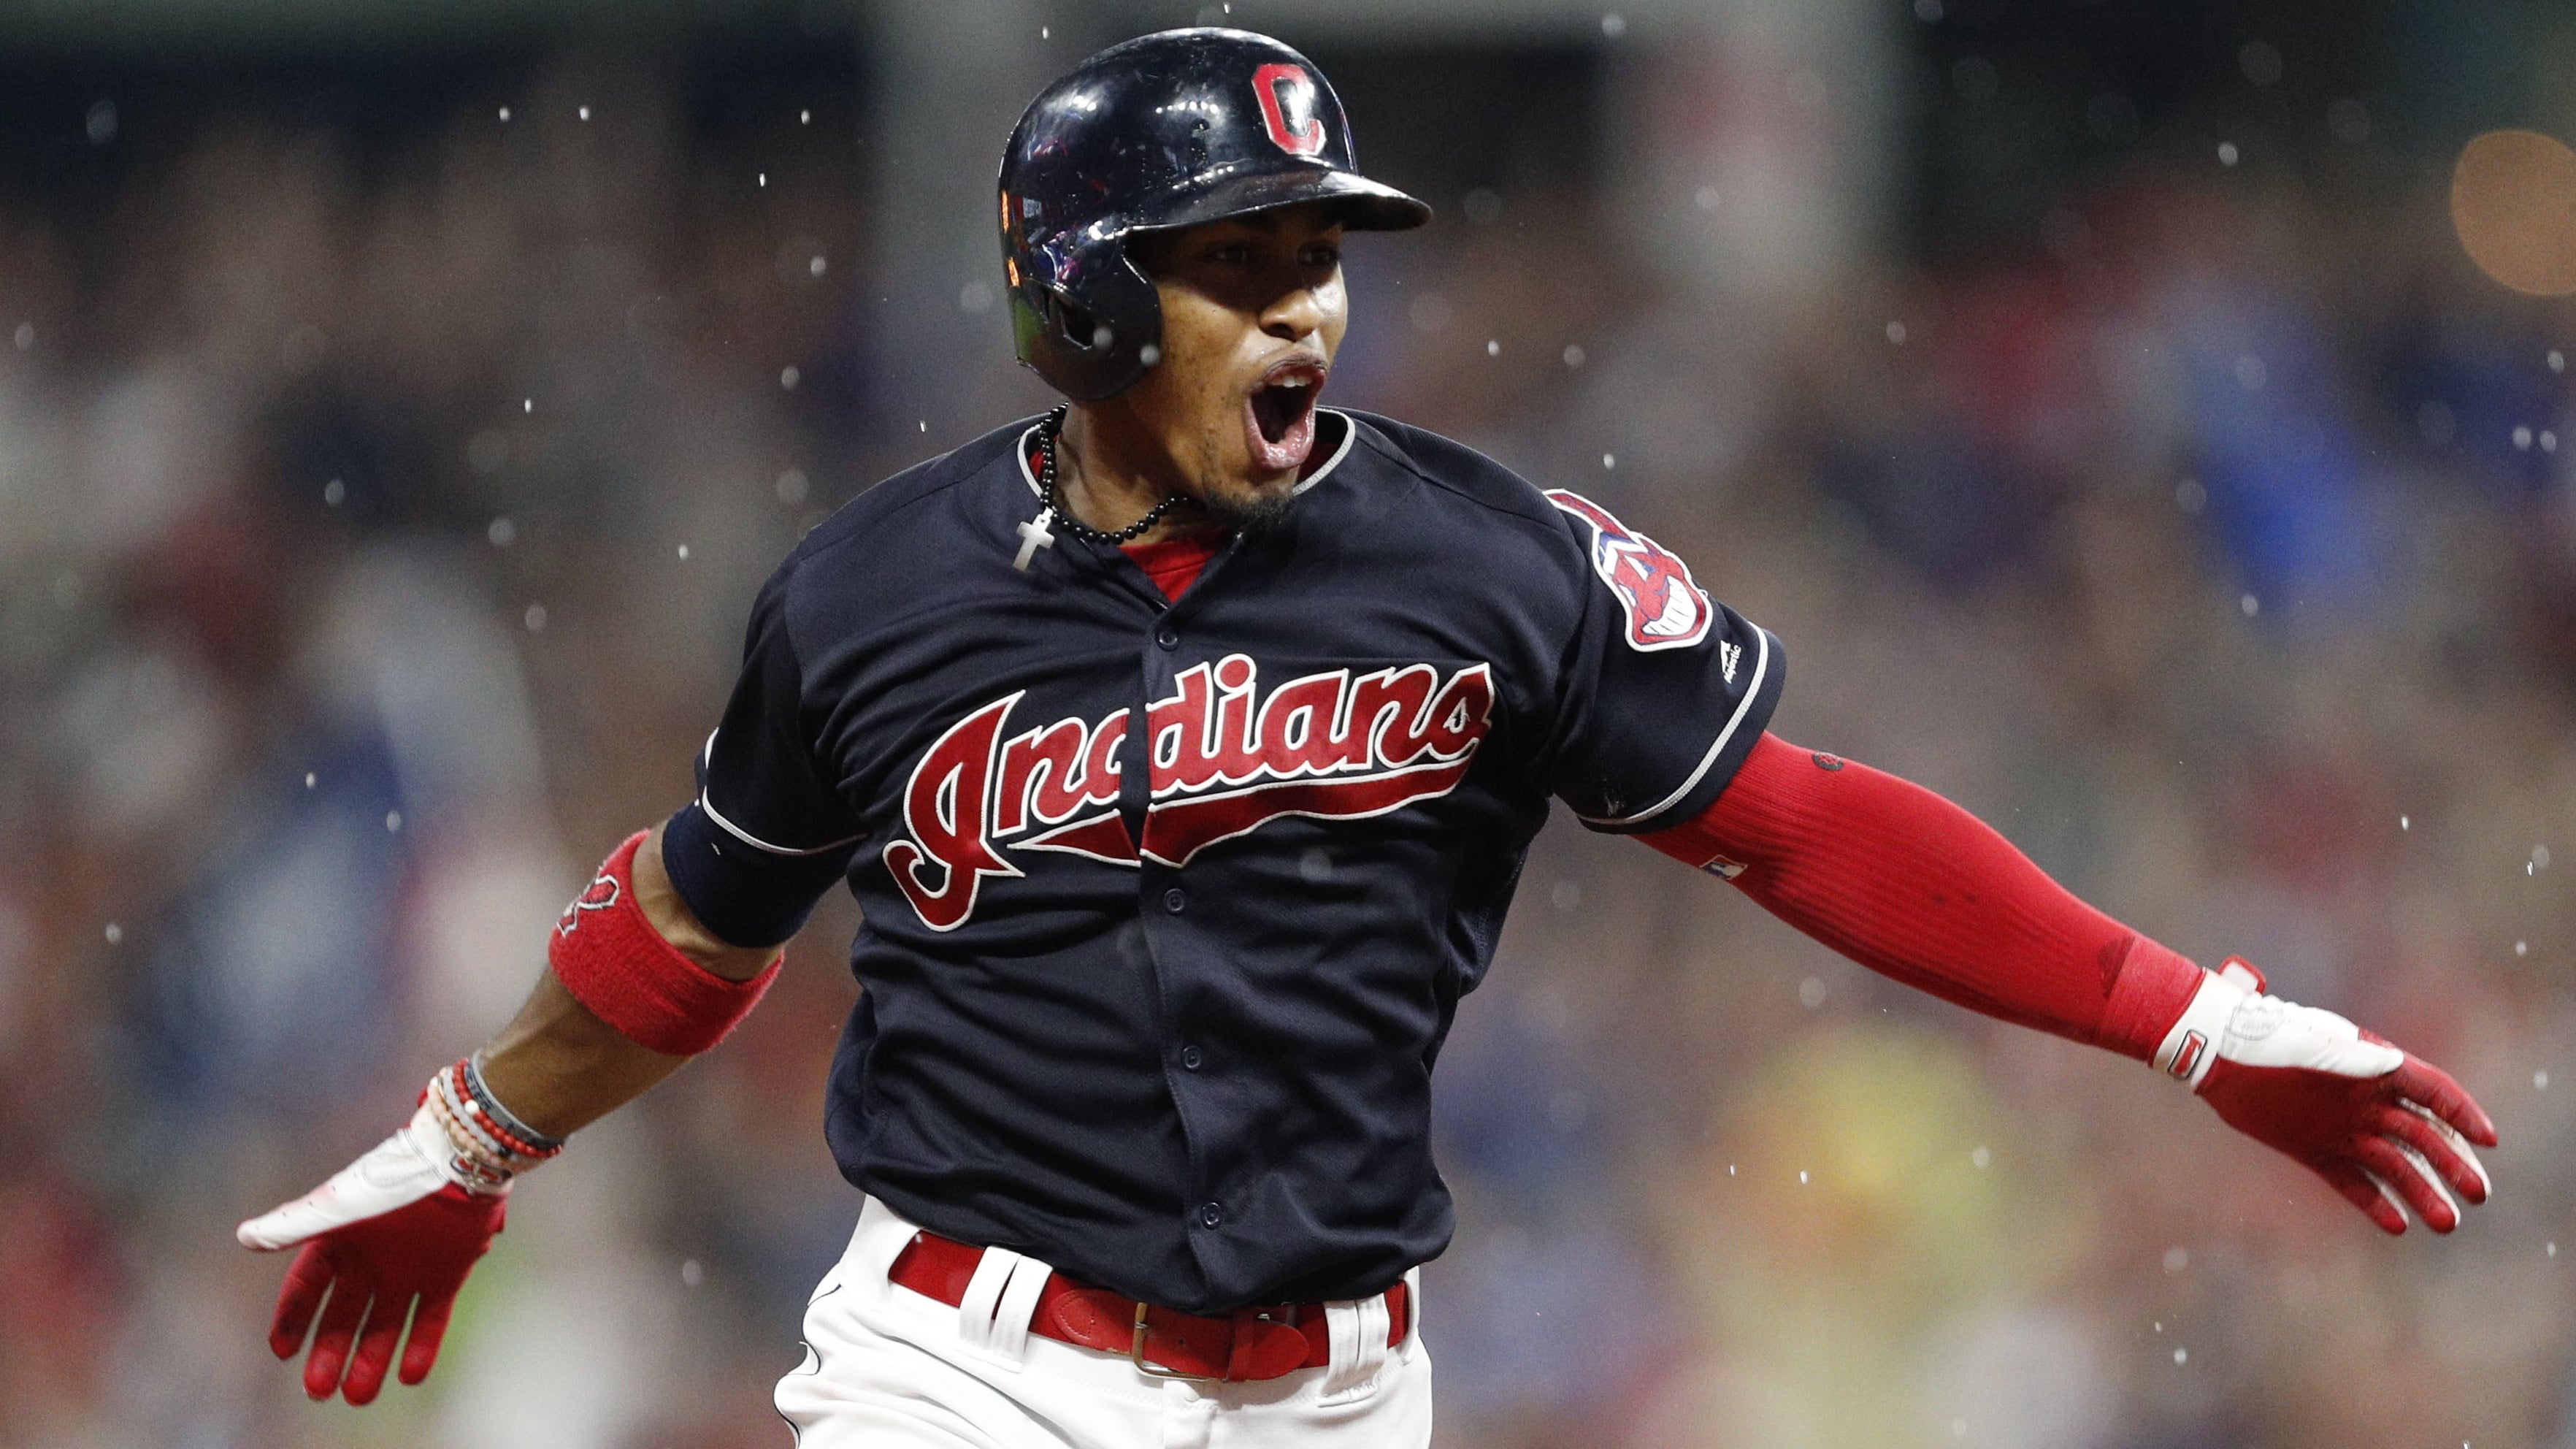 Francisco Lindor commits key error in Game 1 loss